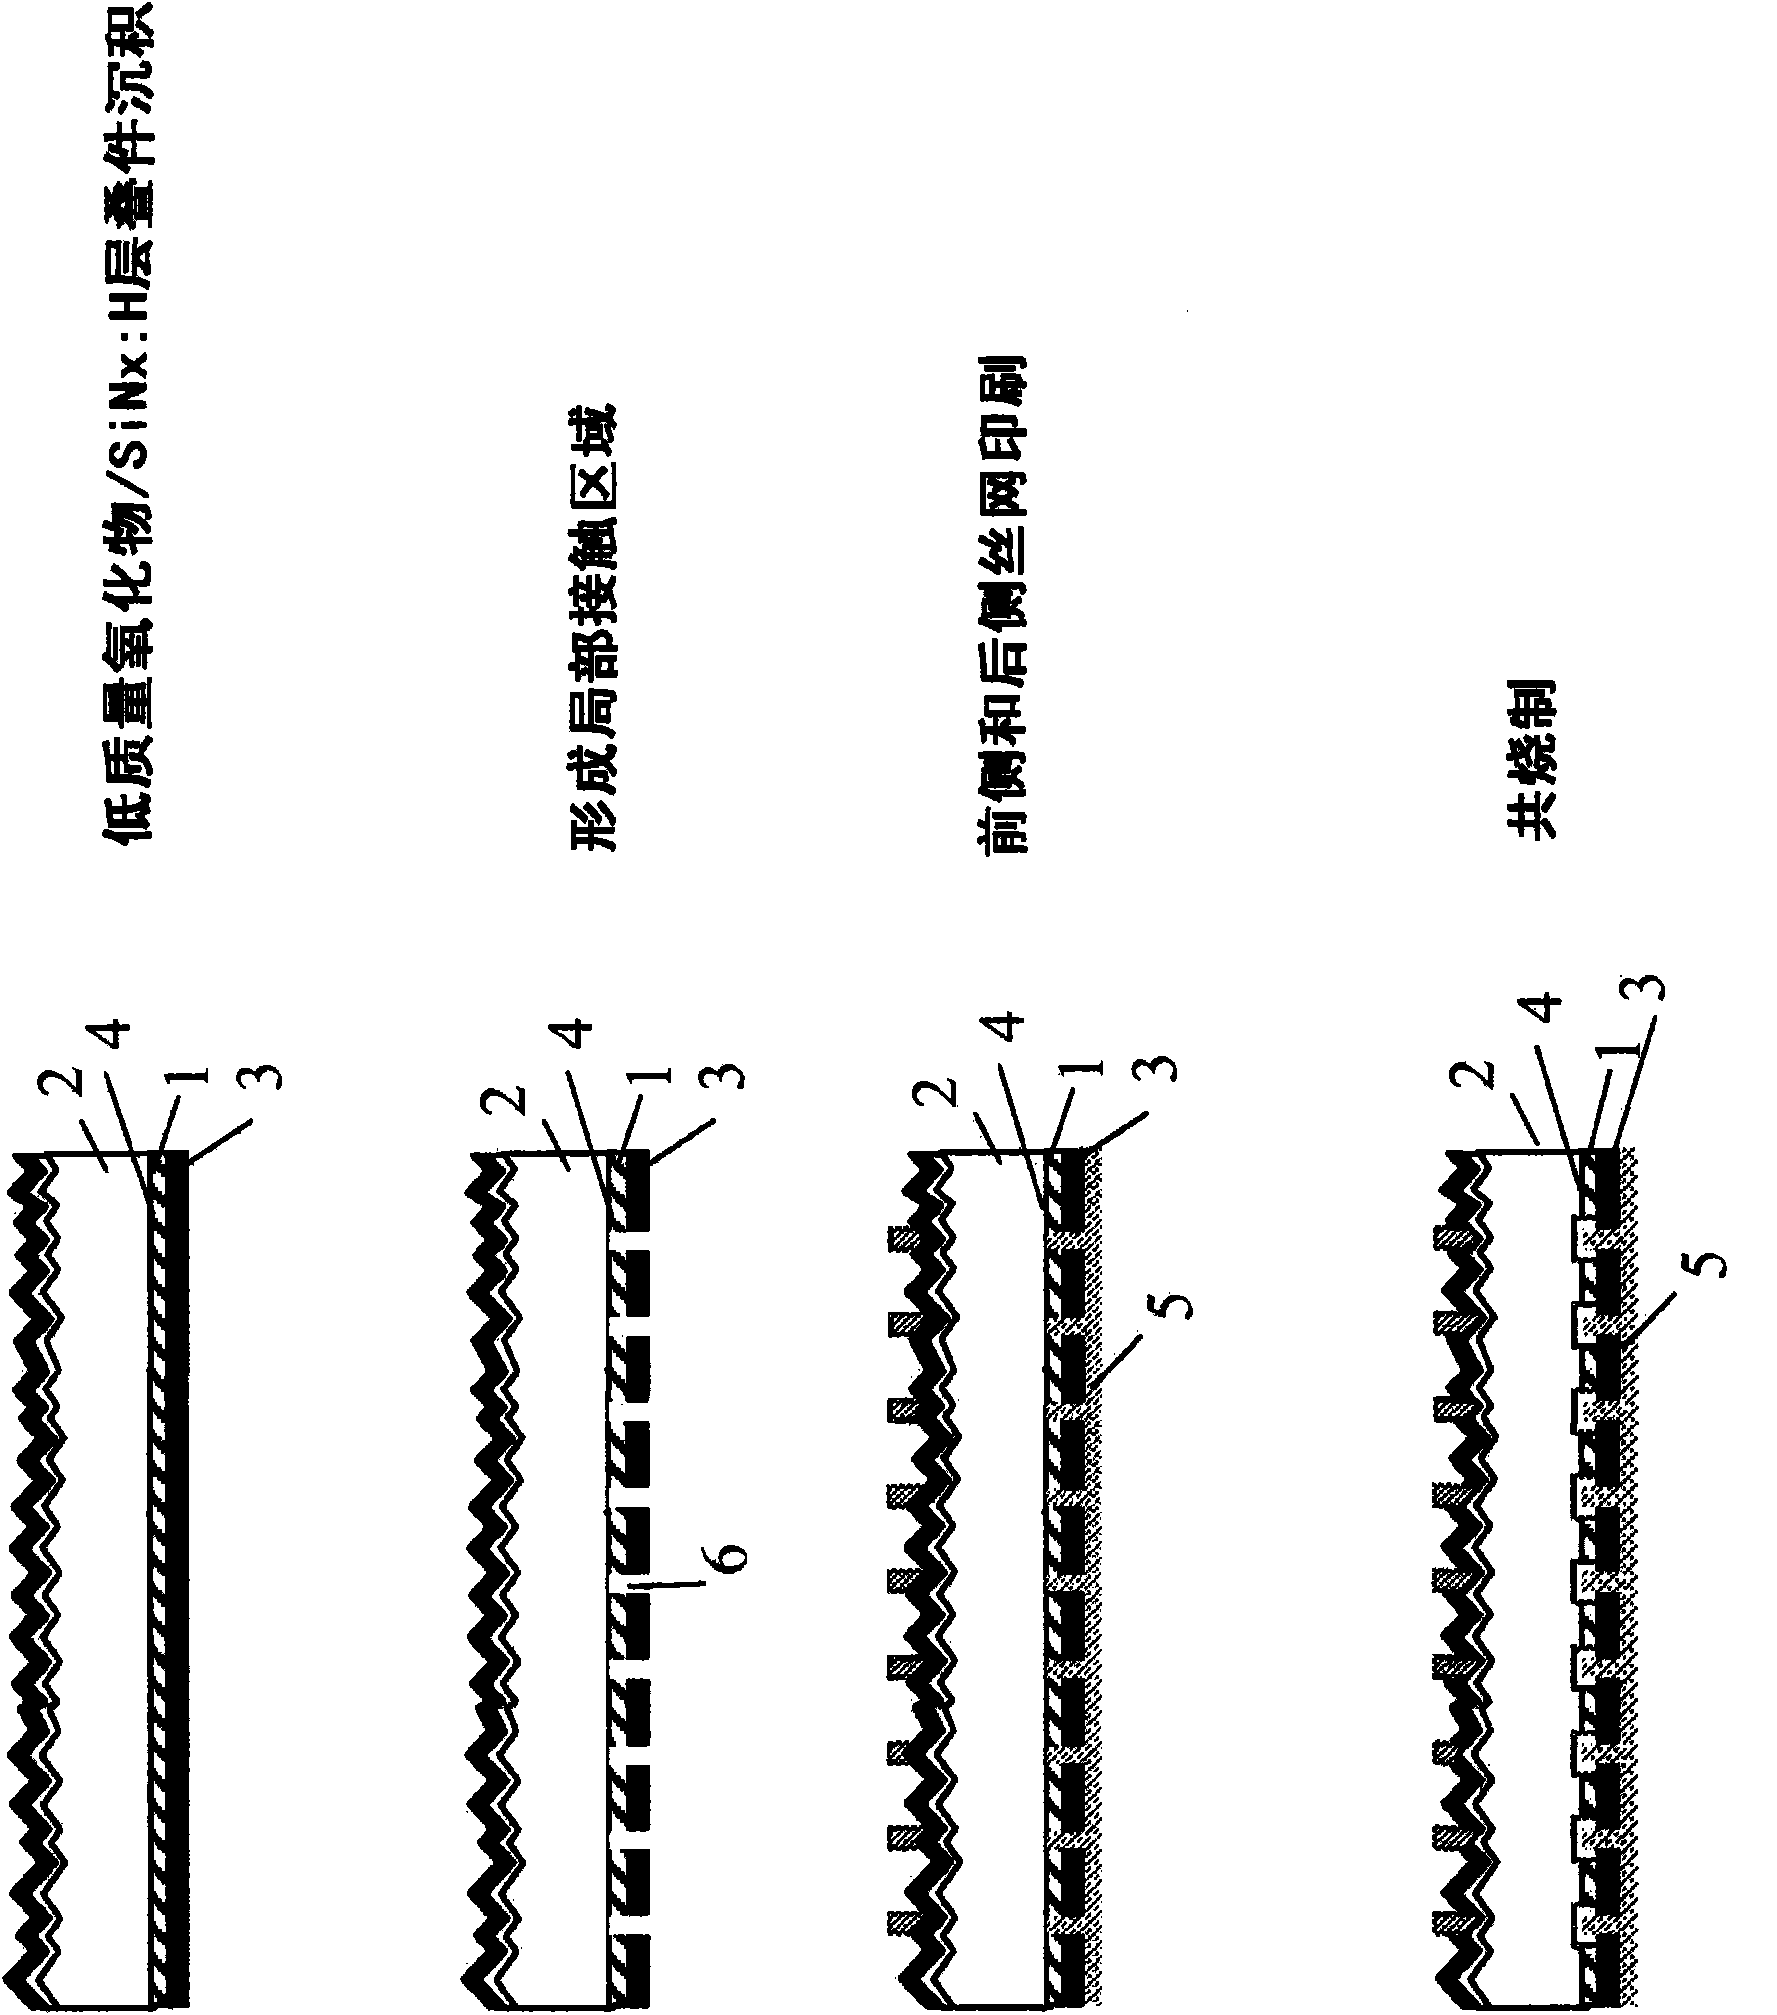 Photovoltaic cells having metal wrap through and improved passivation